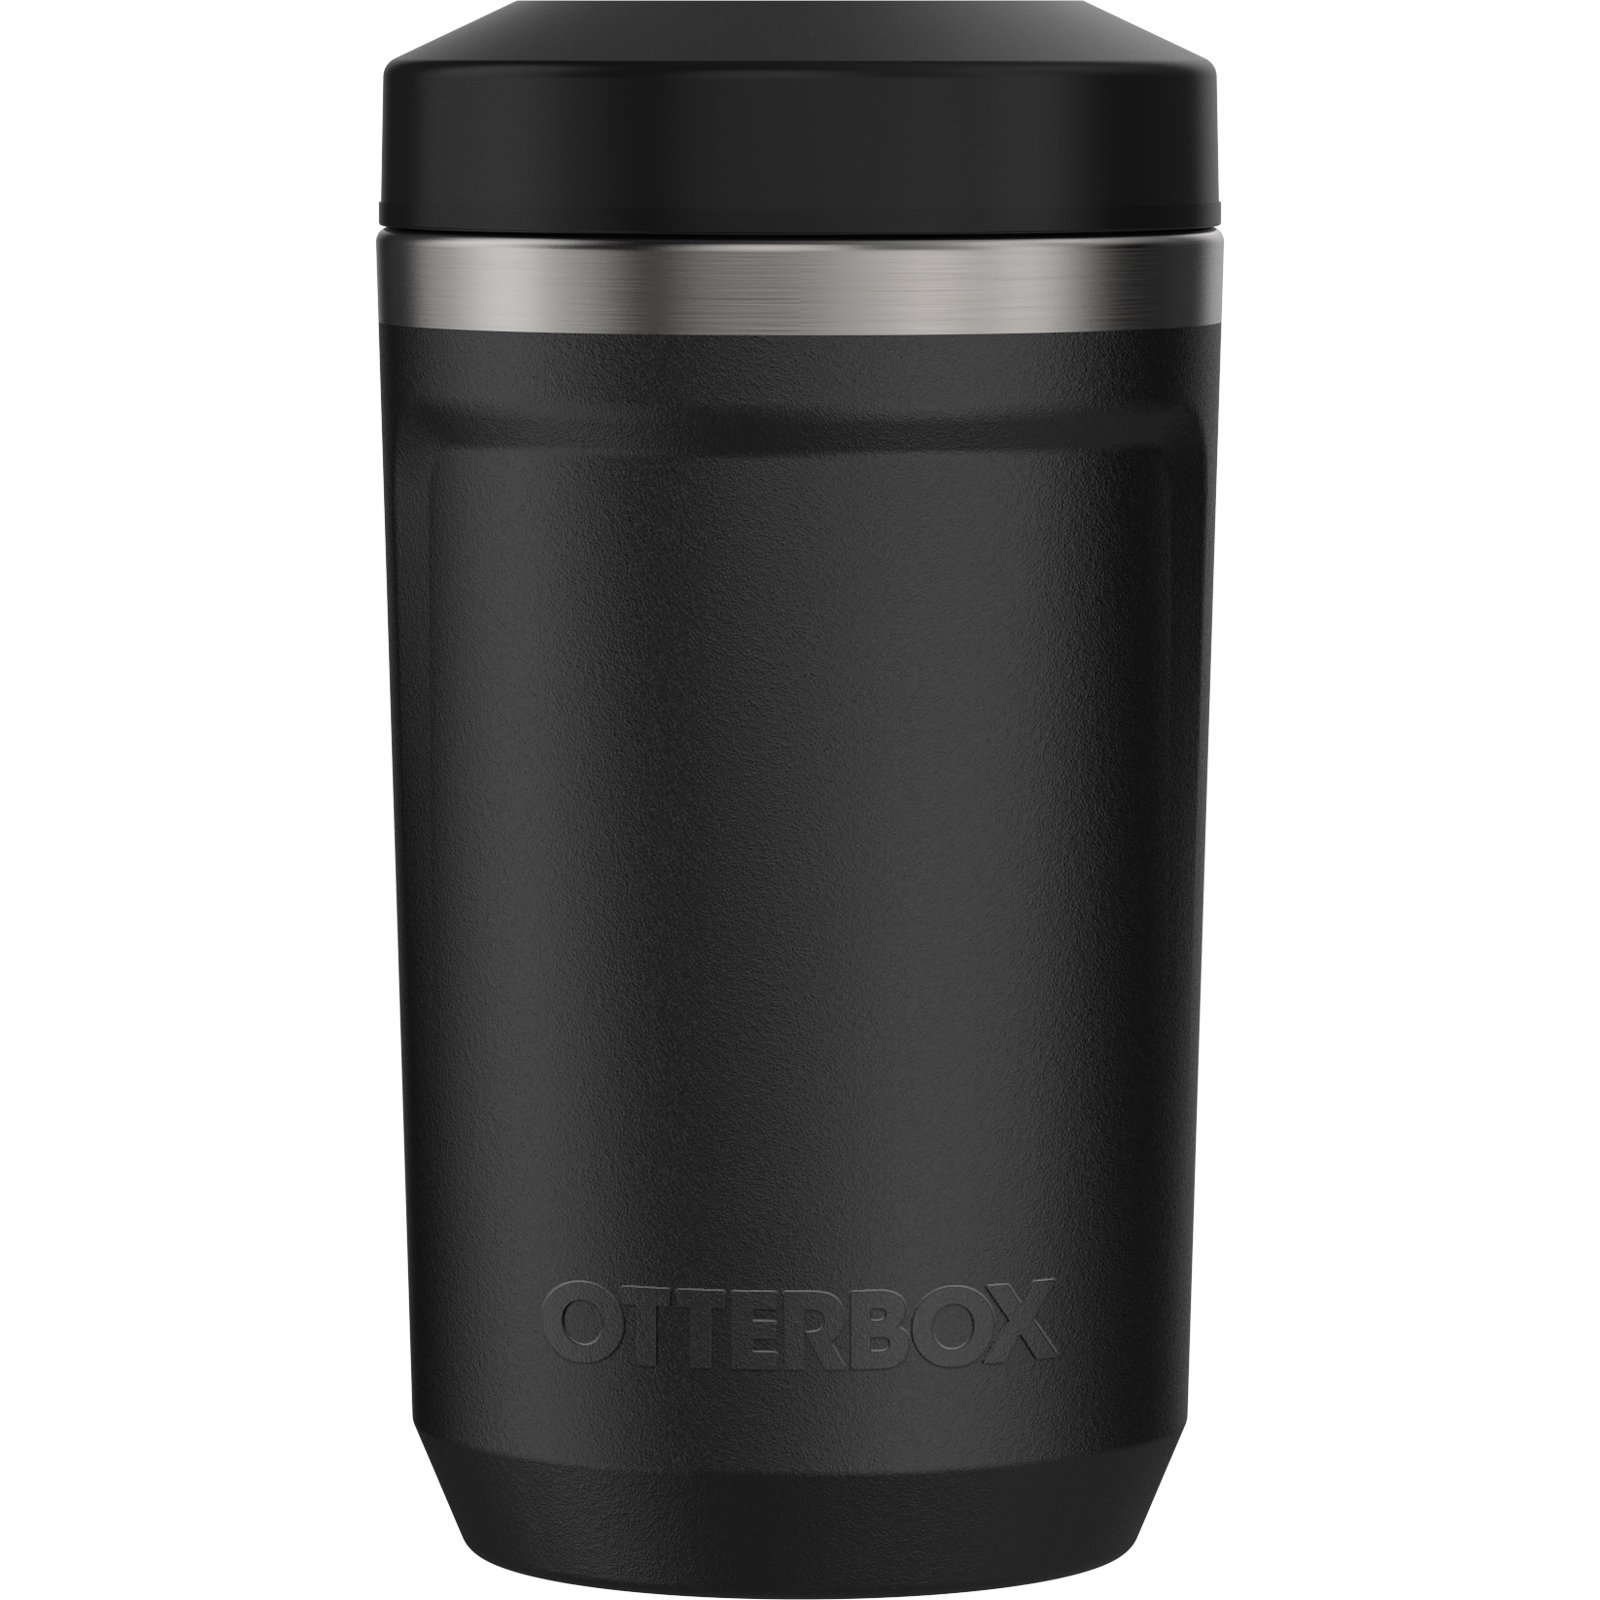 https://www.otterbox.com/on/demandware.static/-/Sites-masterCatalog/default/dw94f5a542/productimages/dis/outdoor/elevation-can-cooler/elevation-can-cooler-silver-panther-1.jpg